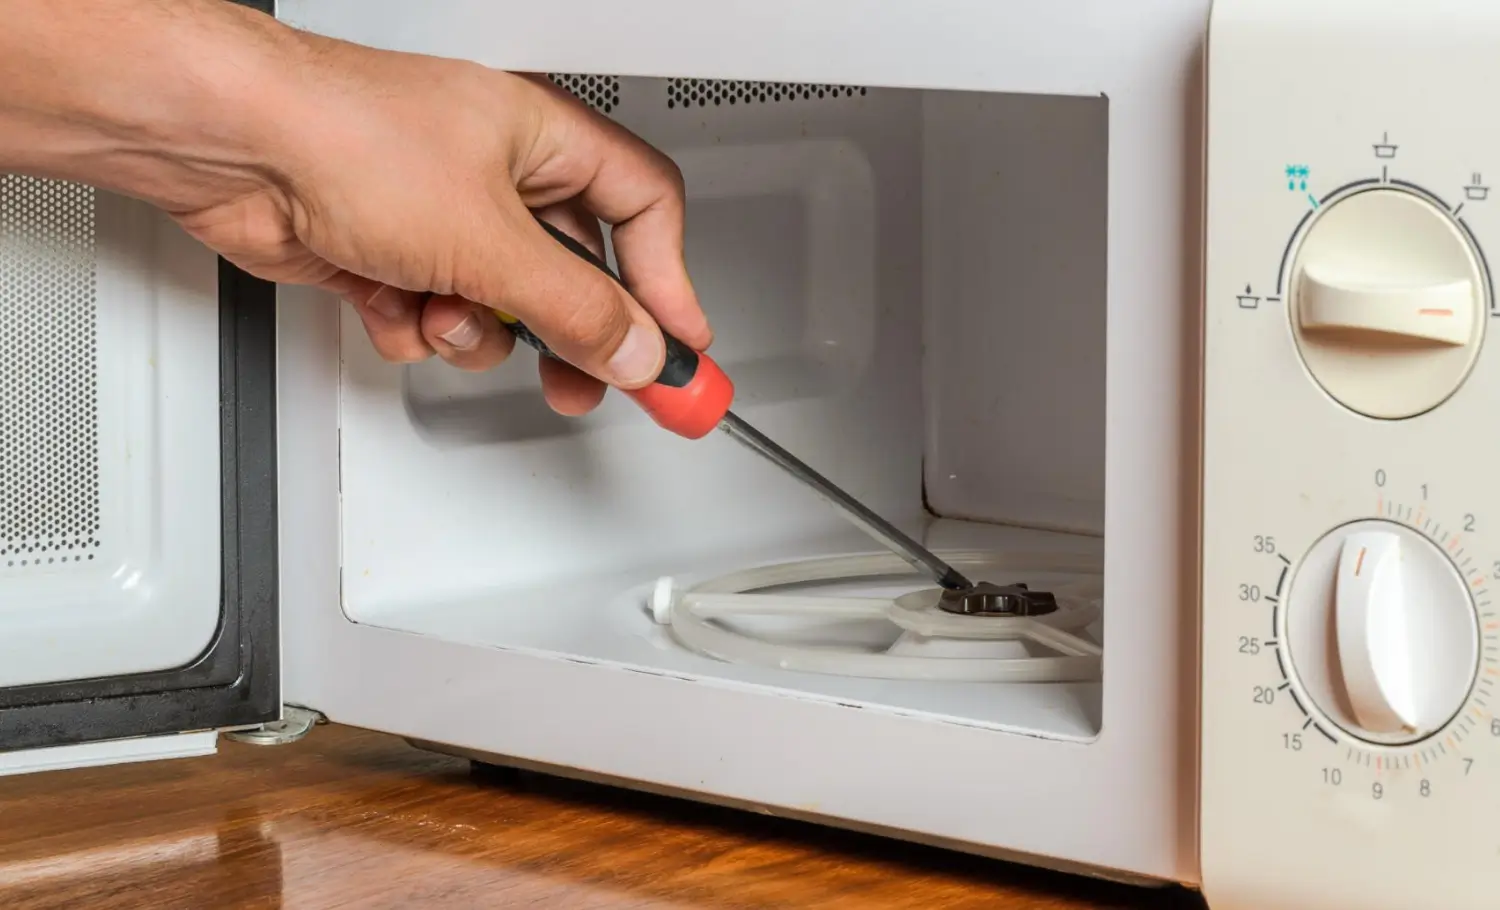 Person fixing microwave with screwdriver.